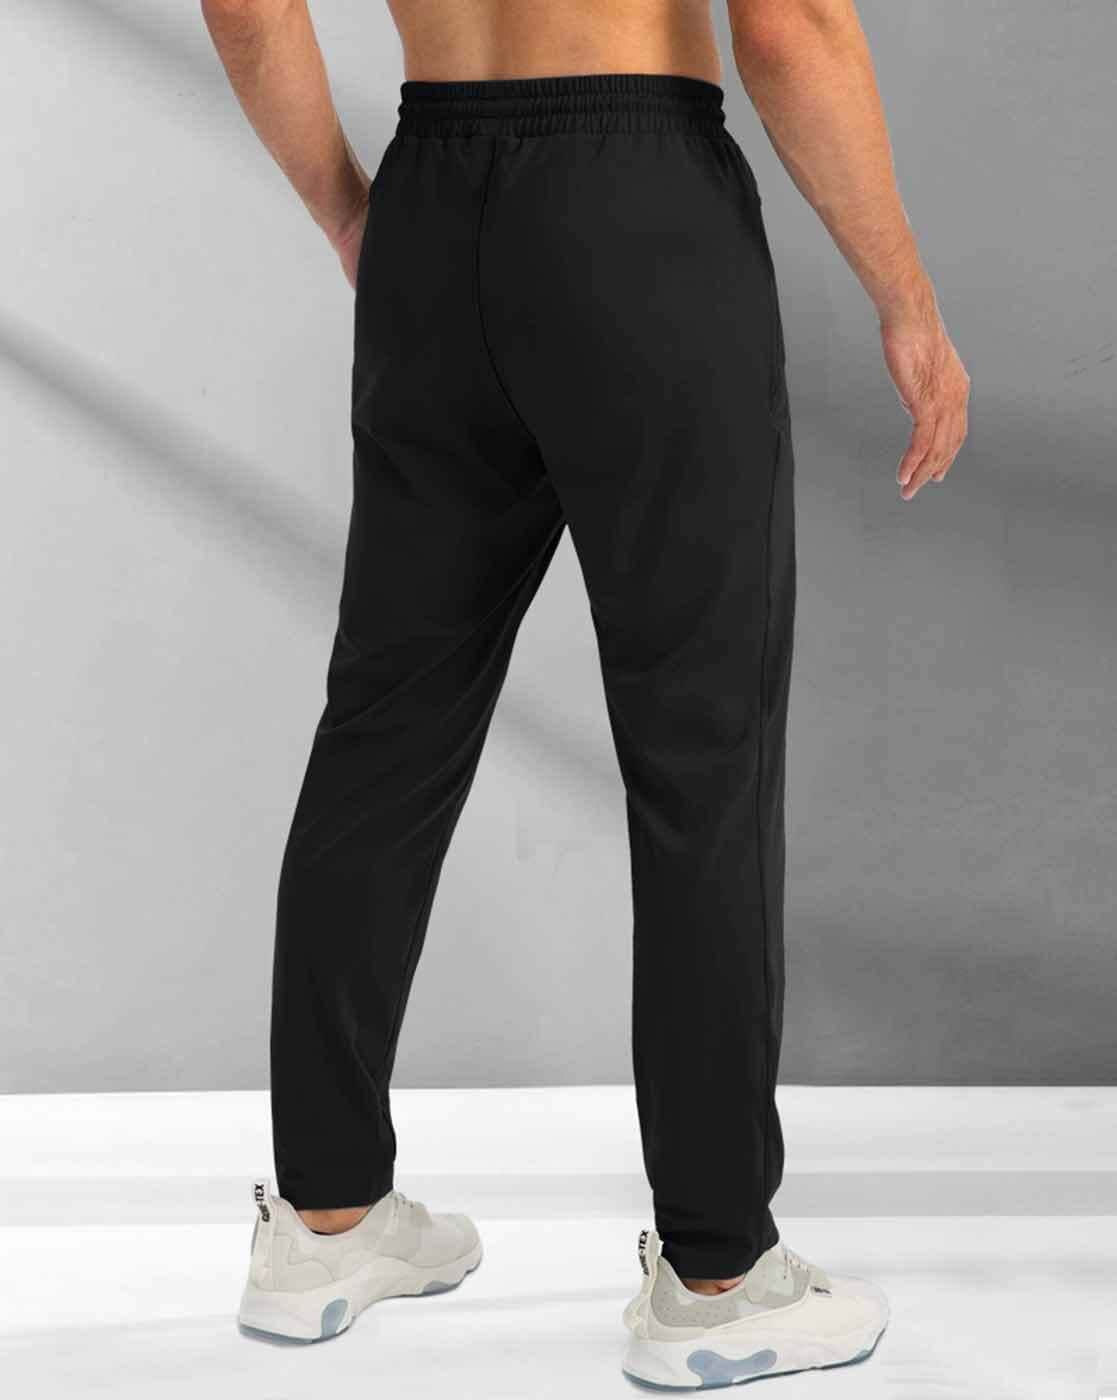 Buy Black Track Pants for Women by MADAME Online | Ajio.com